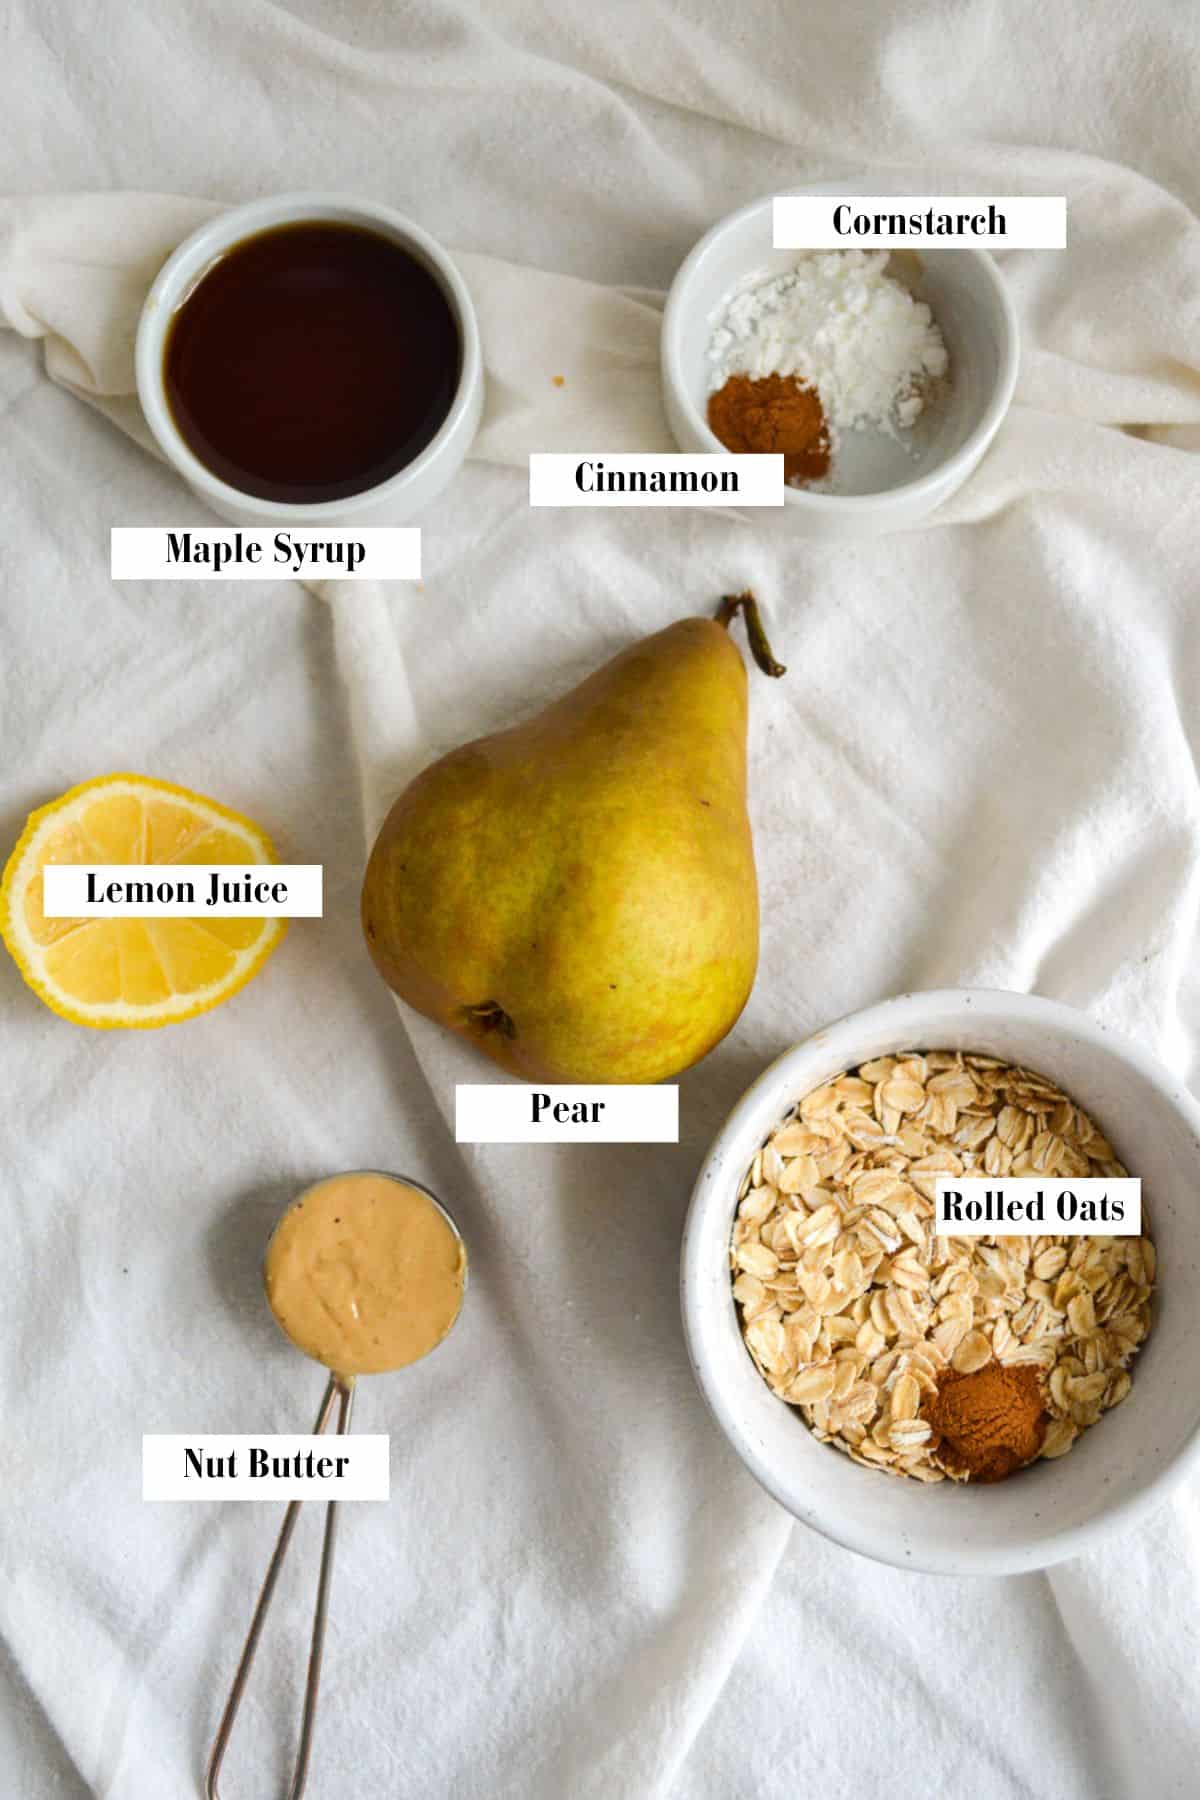 Overhead photo of a pear, rolled oats, cinnamon, a spoon of nut butter, a slice of lemon and maple syrup.